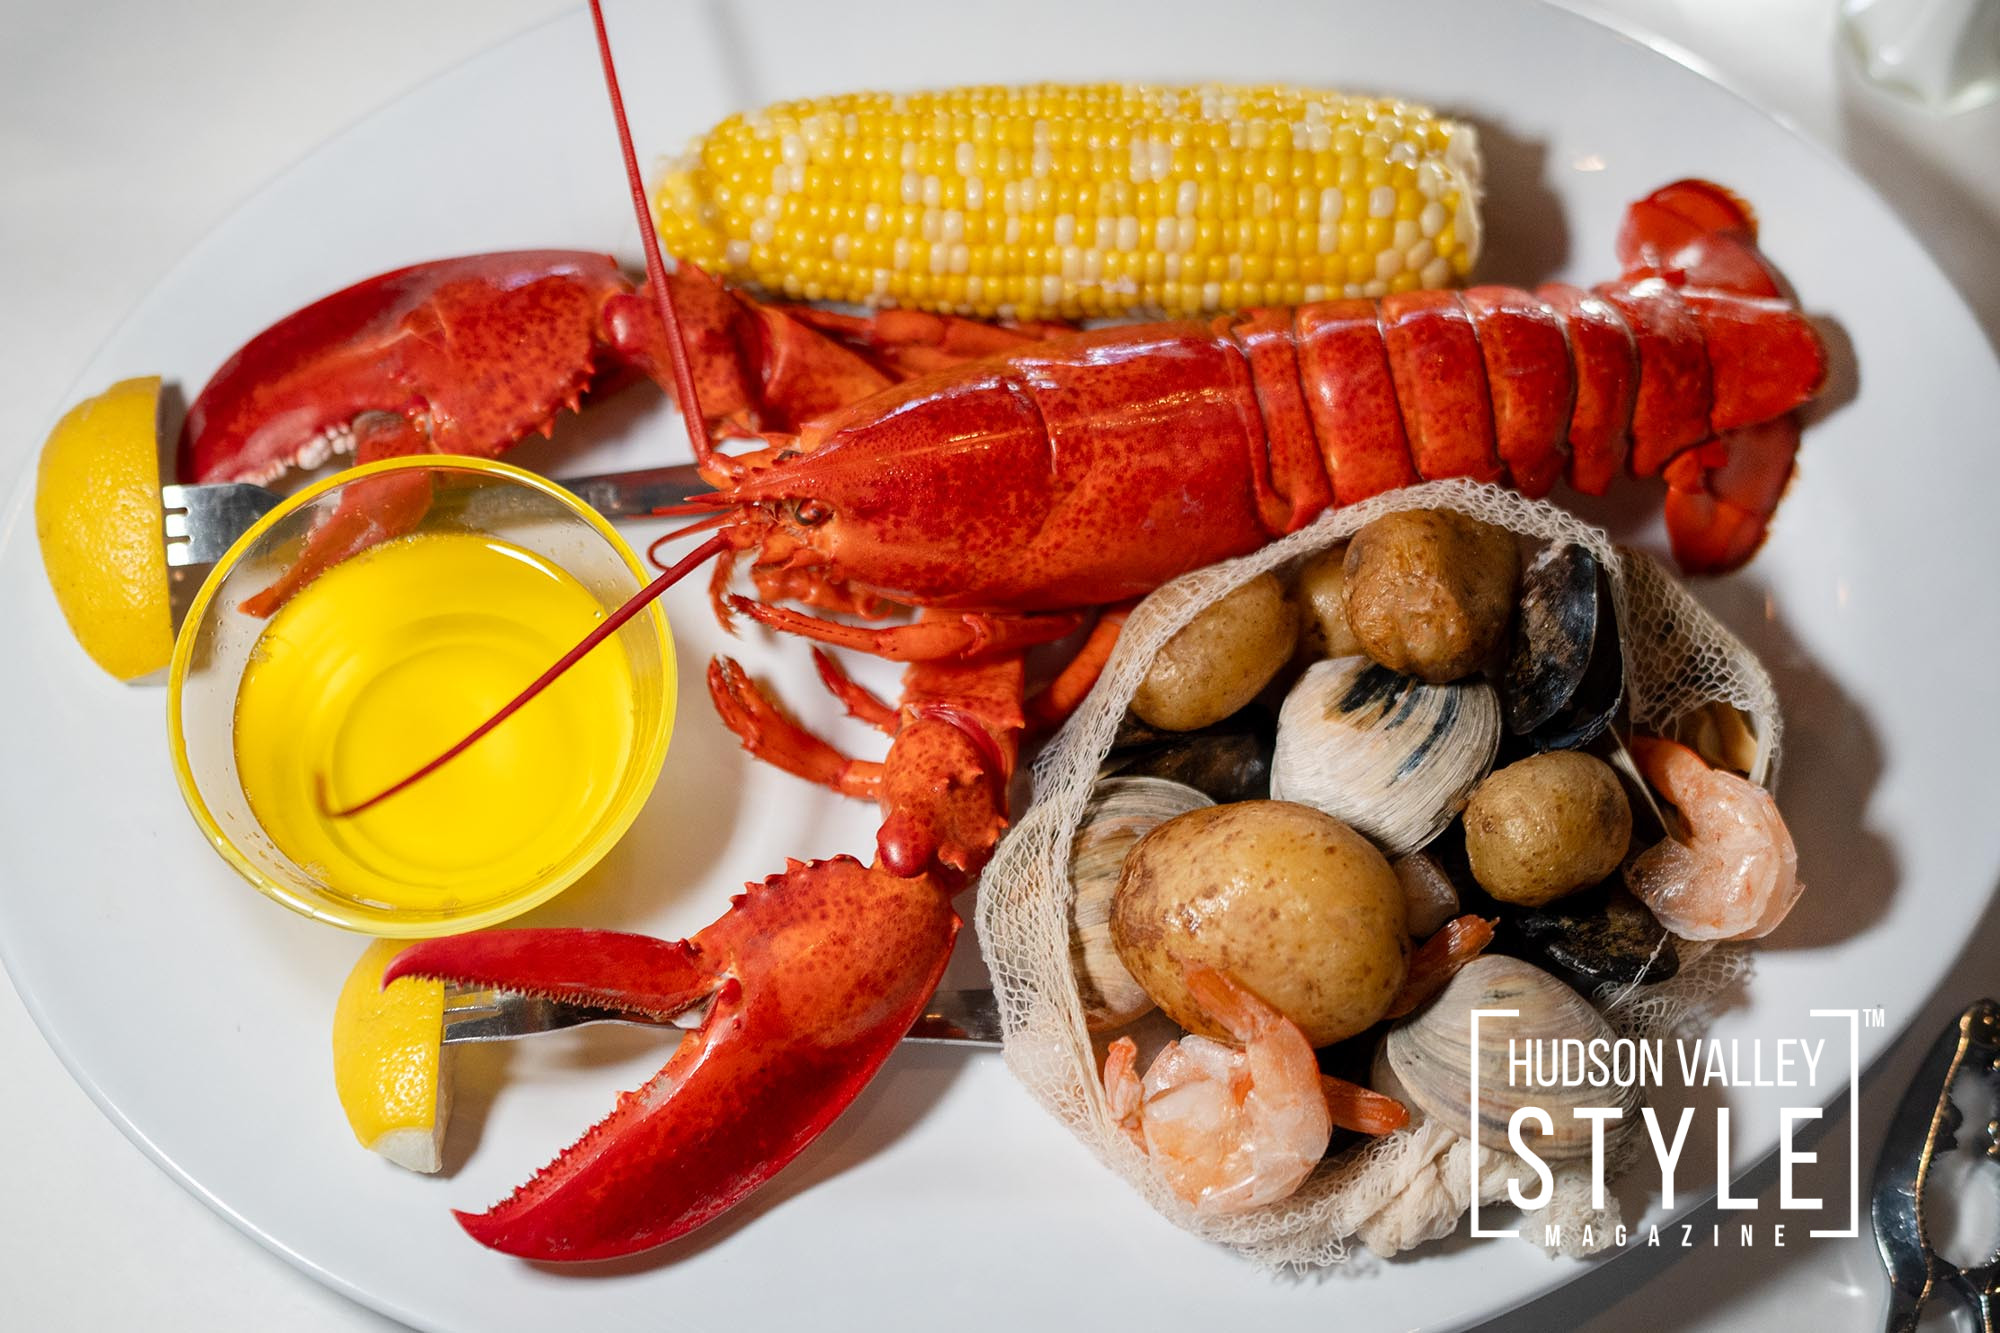 Frank Guido's Port of Call: A Lobster Bake Fit for a King (or Queen) in the Hudson Valley – Catskill, NY – Restaurant Reviews with Photographer Maxwell Alexander